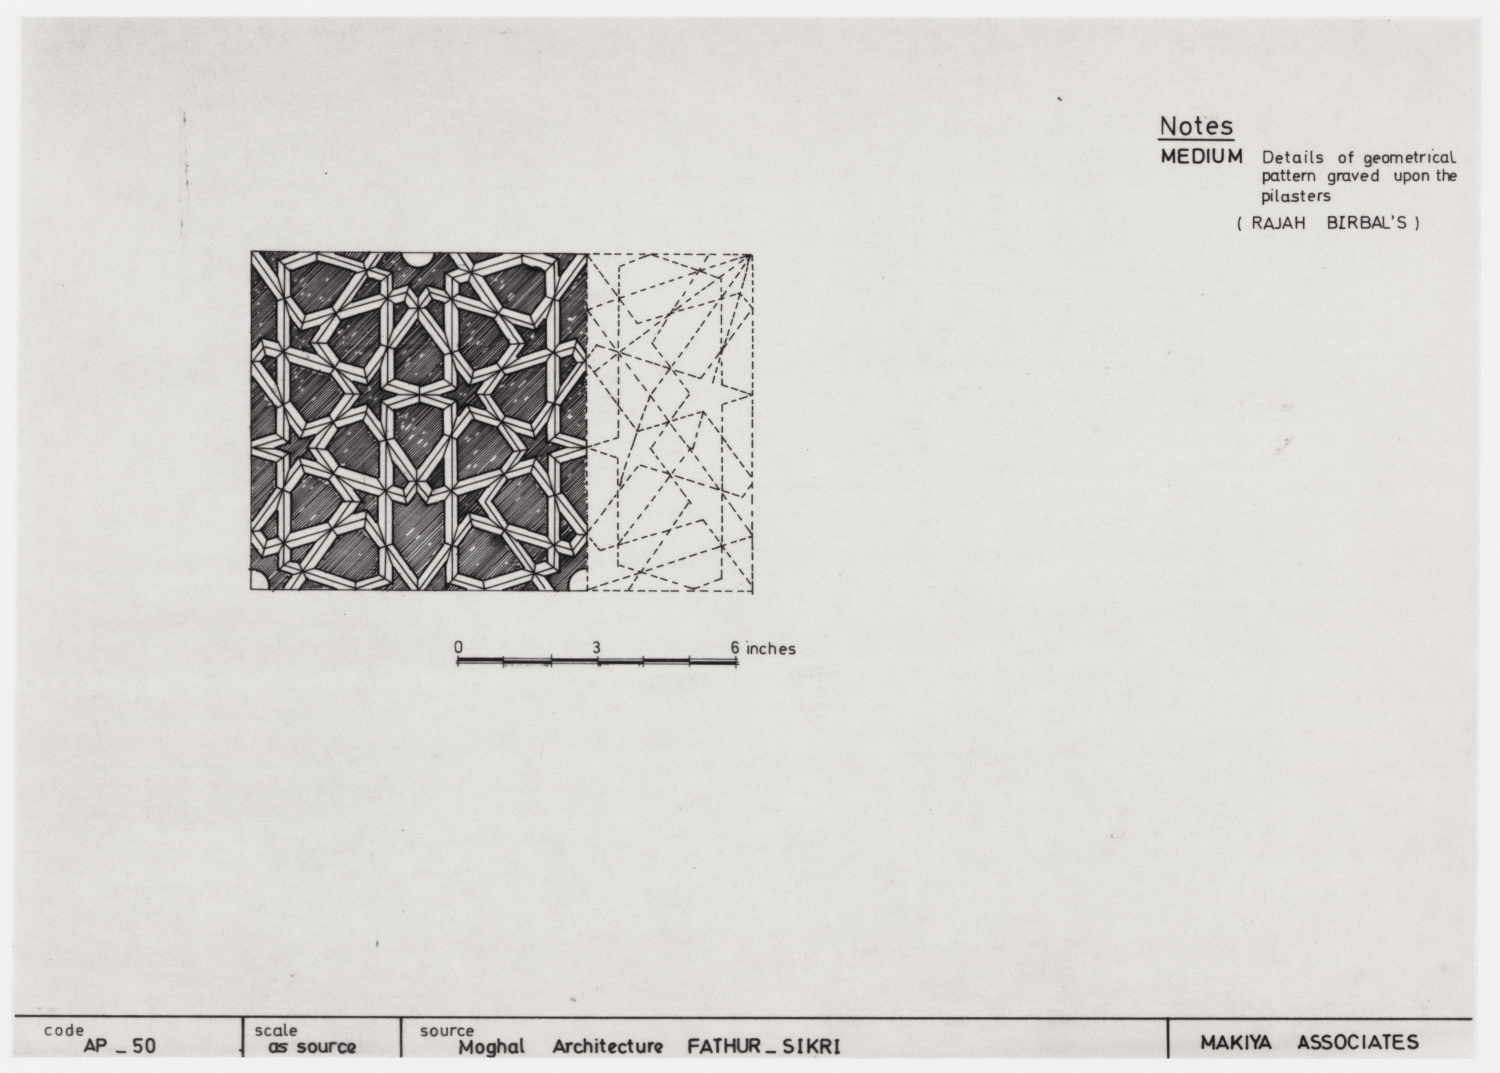 Details of geometrical pattern graved upon the pilasters (RAJAH BIRBAL'S). AP-50, Moghal Architecture FATHUR-SIKRI [sic]